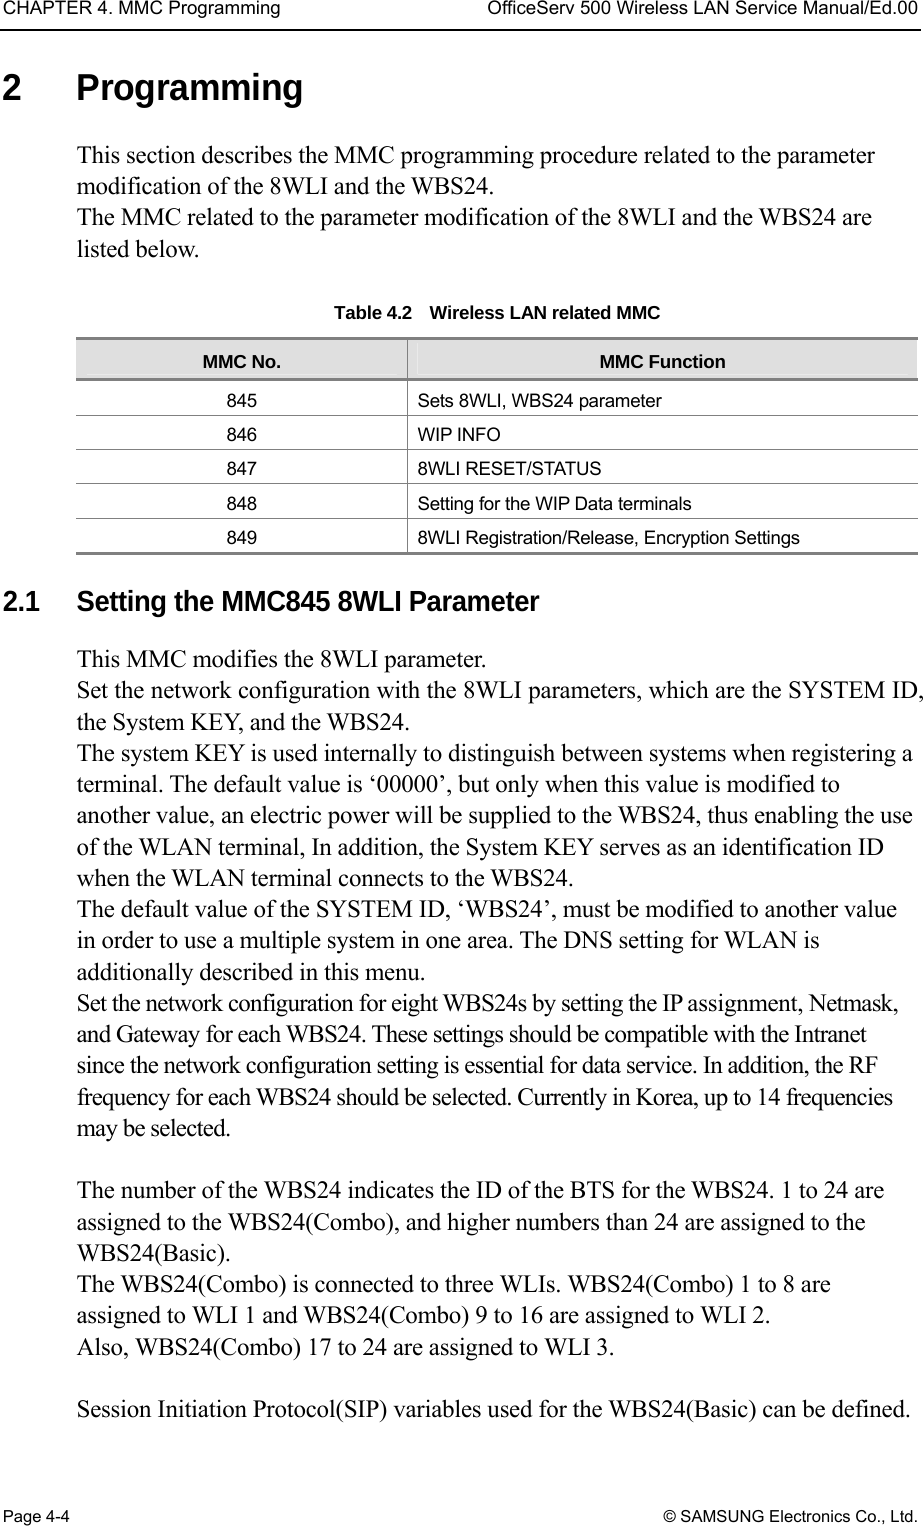 CHAPTER 4. MMC Programming  OfficeServ 500 Wireless LAN Service Manual/Ed.00 Page 4-4 © SAMSUNG Electronics Co., Ltd. 2 Programming This section describes the MMC programming procedure related to the parameter modification of the 8WLI and the WBS24. The MMC related to the parameter modification of the 8WLI and the WBS24 are listed below.   Table 4.2    Wireless LAN related MMC MMC No.  MMC Function 845  Sets 8WLI, WBS24 parameter 846 WIP INFO 847 8WLI RESET/STATUS 848  Setting for the WIP Data terminals 849  8WLI Registration/Release, Encryption Settings  2.1  Setting the MMC845 8WLI Parameter This MMC modifies the 8WLI parameter.   Set the network configuration with the 8WLI parameters, which are the SYSTEM ID, the System KEY, and the WBS24. The system KEY is used internally to distinguish between systems when registering a terminal. The default value is ‘00000’, but only when this value is modified to another value, an electric power will be supplied to the WBS24, thus enabling the use of the WLAN terminal, In addition, the System KEY serves as an identification ID when the WLAN terminal connects to the WBS24.   The default value of the SYSTEM ID, ‘WBS24’, must be modified to another value in order to use a multiple system in one area. The DNS setting for WLAN is additionally described in this menu. Set the network configuration for eight WBS24s by setting the IP assignment, Netmask, and Gateway for each WBS24. These settings should be compatible with the Intranet since the network configuration setting is essential for data service. In addition, the RF frequency for each WBS24 should be selected. Currently in Korea, up to 14 frequencies may be selected.  The number of the WBS24 indicates the ID of the BTS for the WBS24. 1 to 24 are assigned to the WBS24(Combo), and higher numbers than 24 are assigned to the WBS24(Basic). The WBS24(Combo) is connected to three WLIs. WBS24(Combo) 1 to 8 are assigned to WLI 1 and WBS24(Combo) 9 to 16 are assigned to WLI 2.   Also, WBS24(Combo) 17 to 24 are assigned to WLI 3.    Session Initiation Protocol(SIP) variables used for the WBS24(Basic) can be defined. 